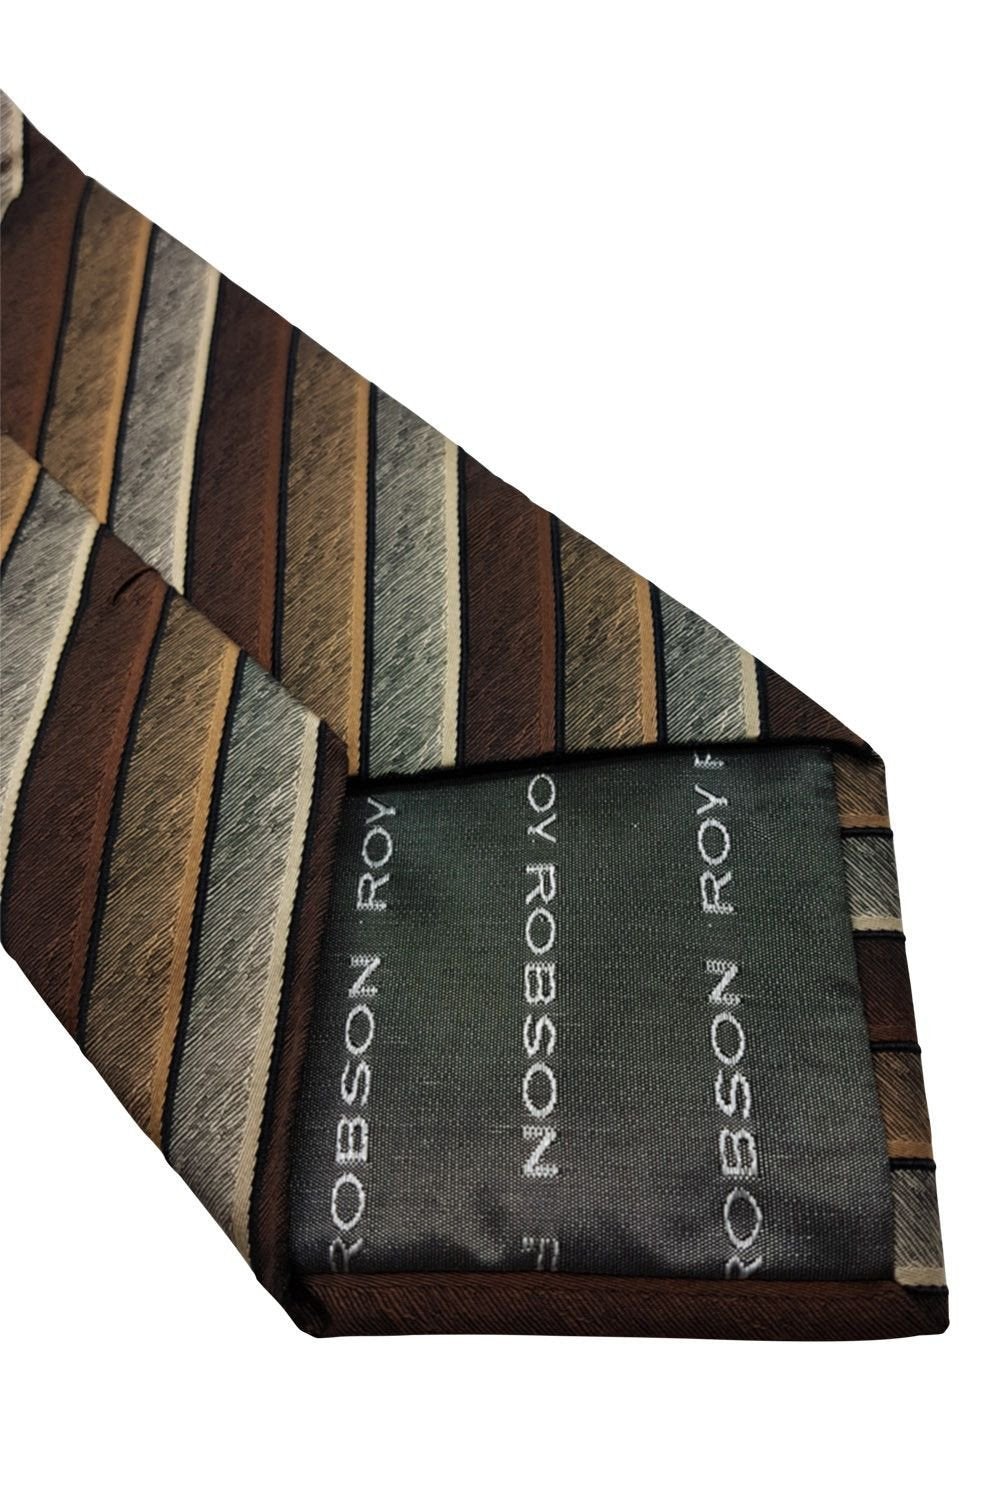 ROY ROBSON Brown Striped Silk Tie (59")-Roy Robson-The Freperie